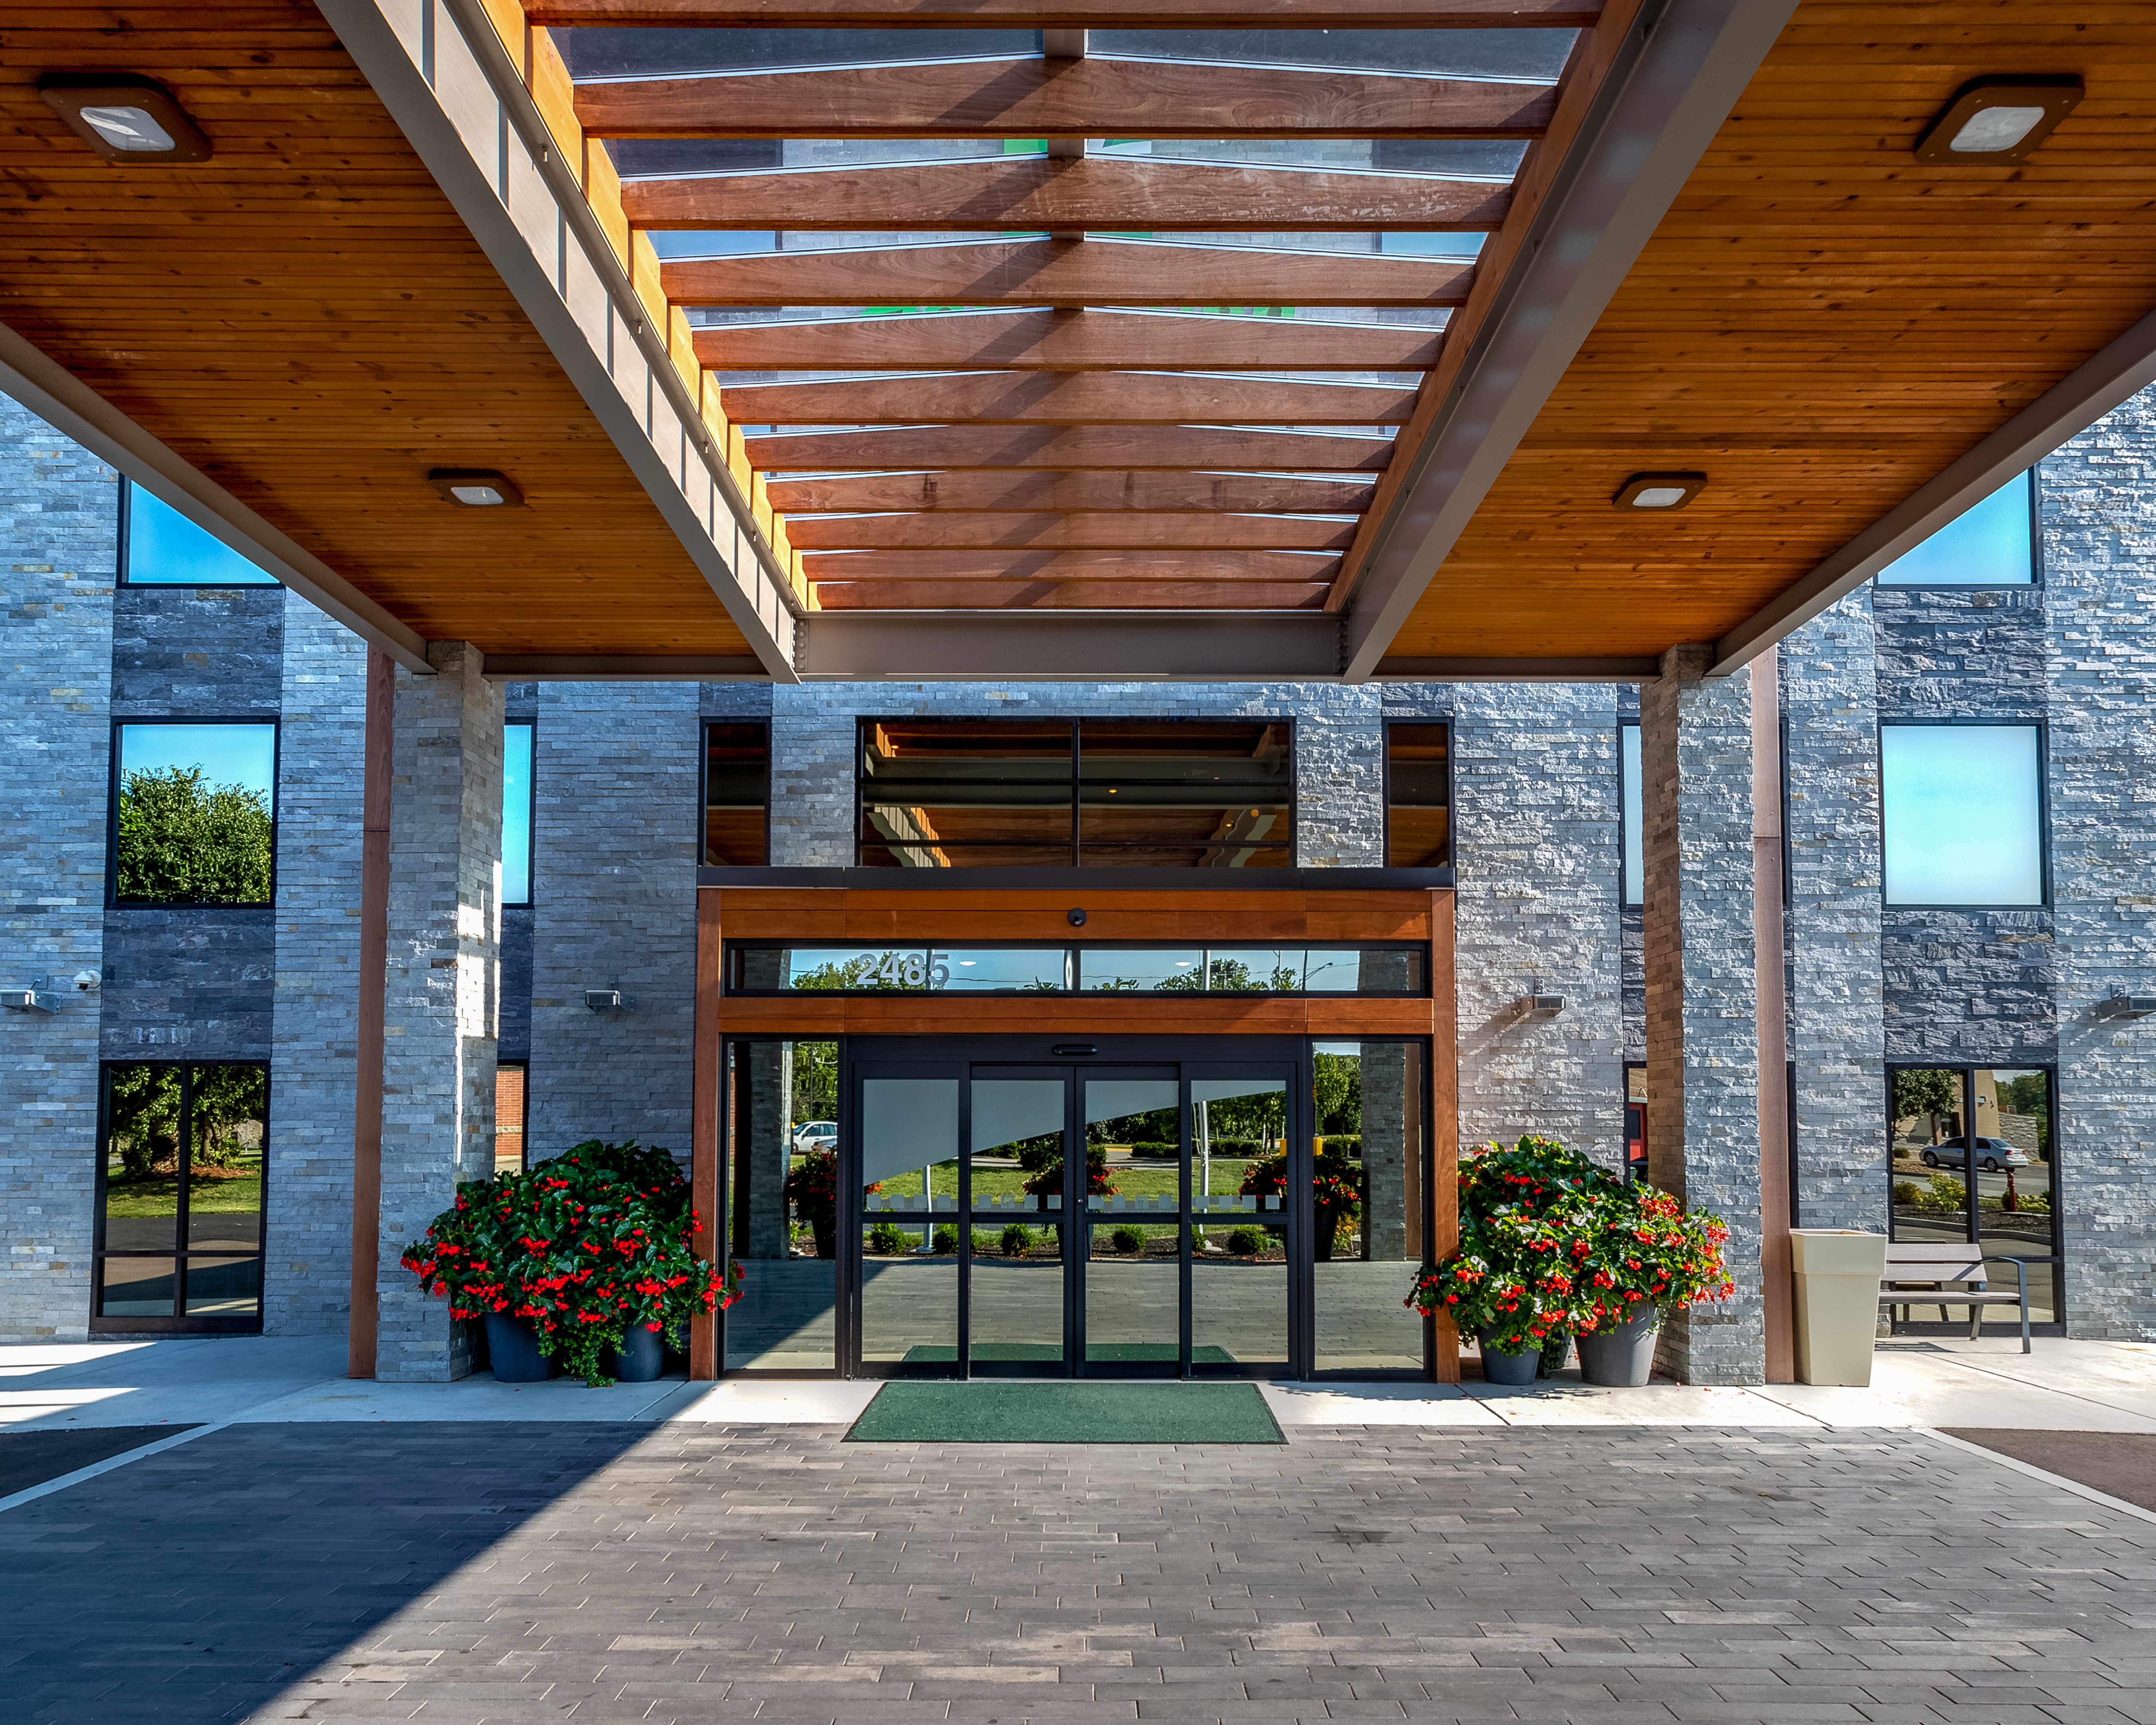 Welcome to Holiday Inn Columbus; modern flair with natural wood